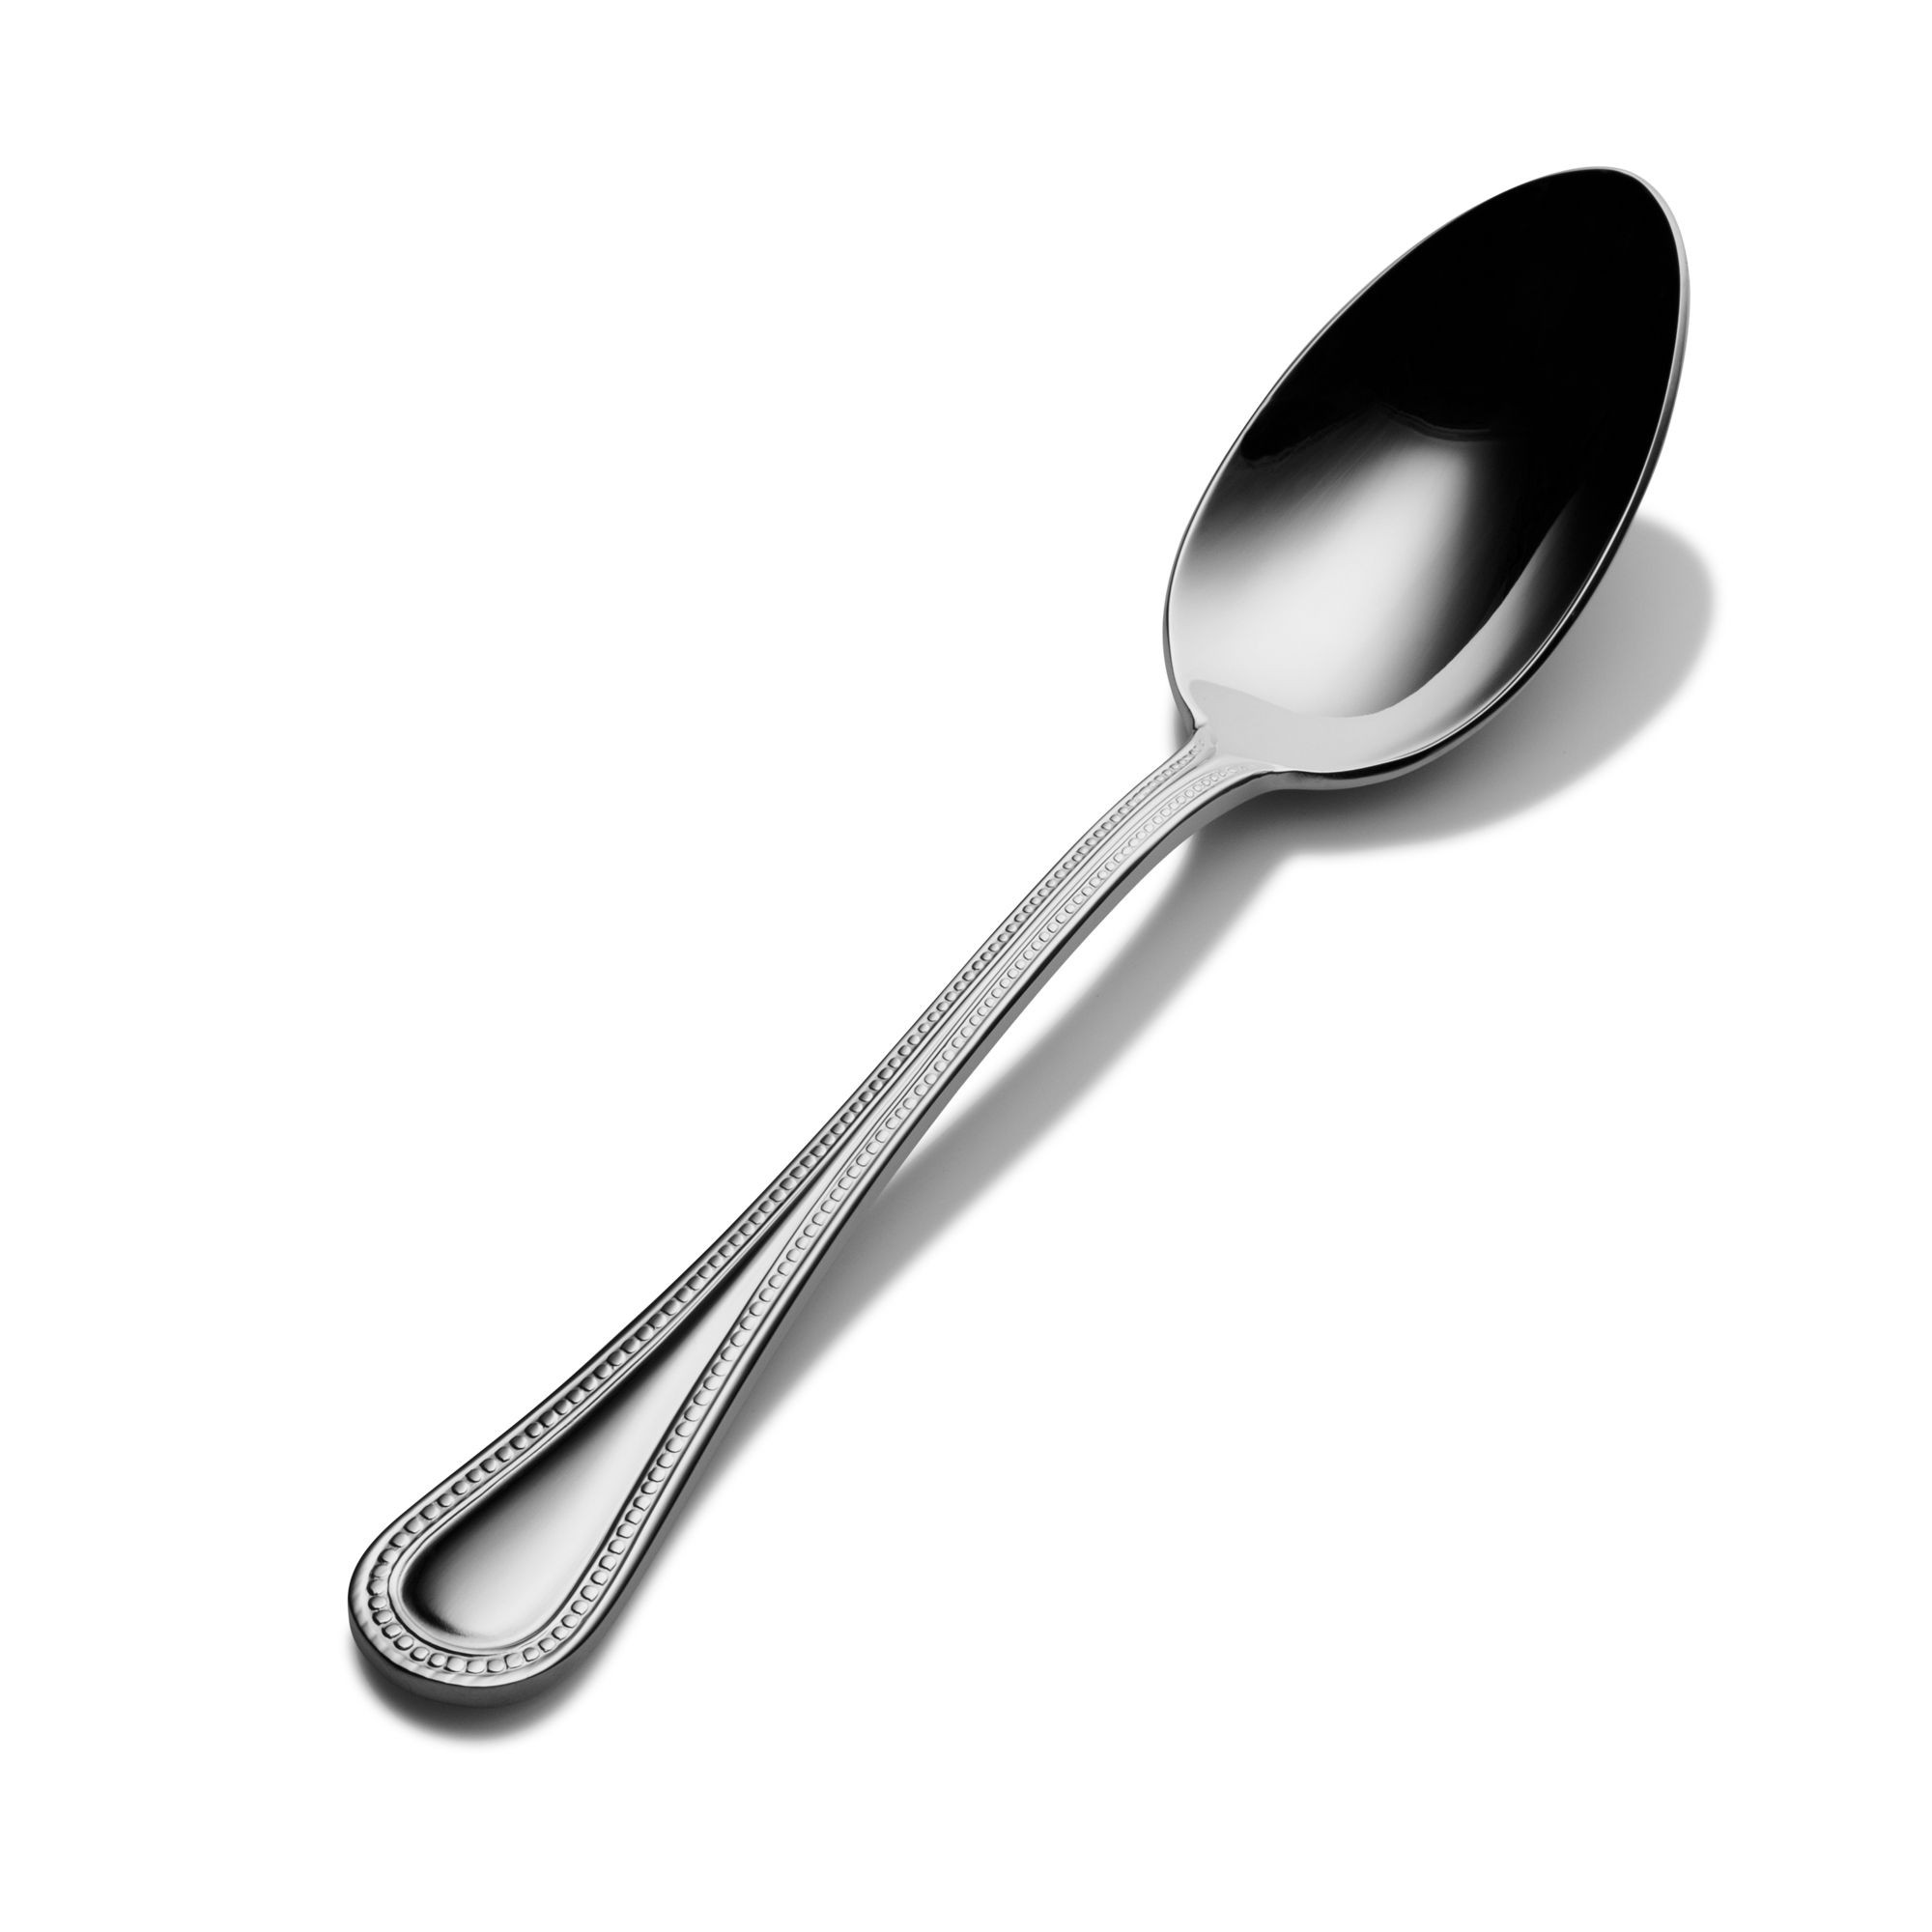 Bon Chef S1003 Sombrero 18/8 Stainless Steel Soup and Dessert Spoon